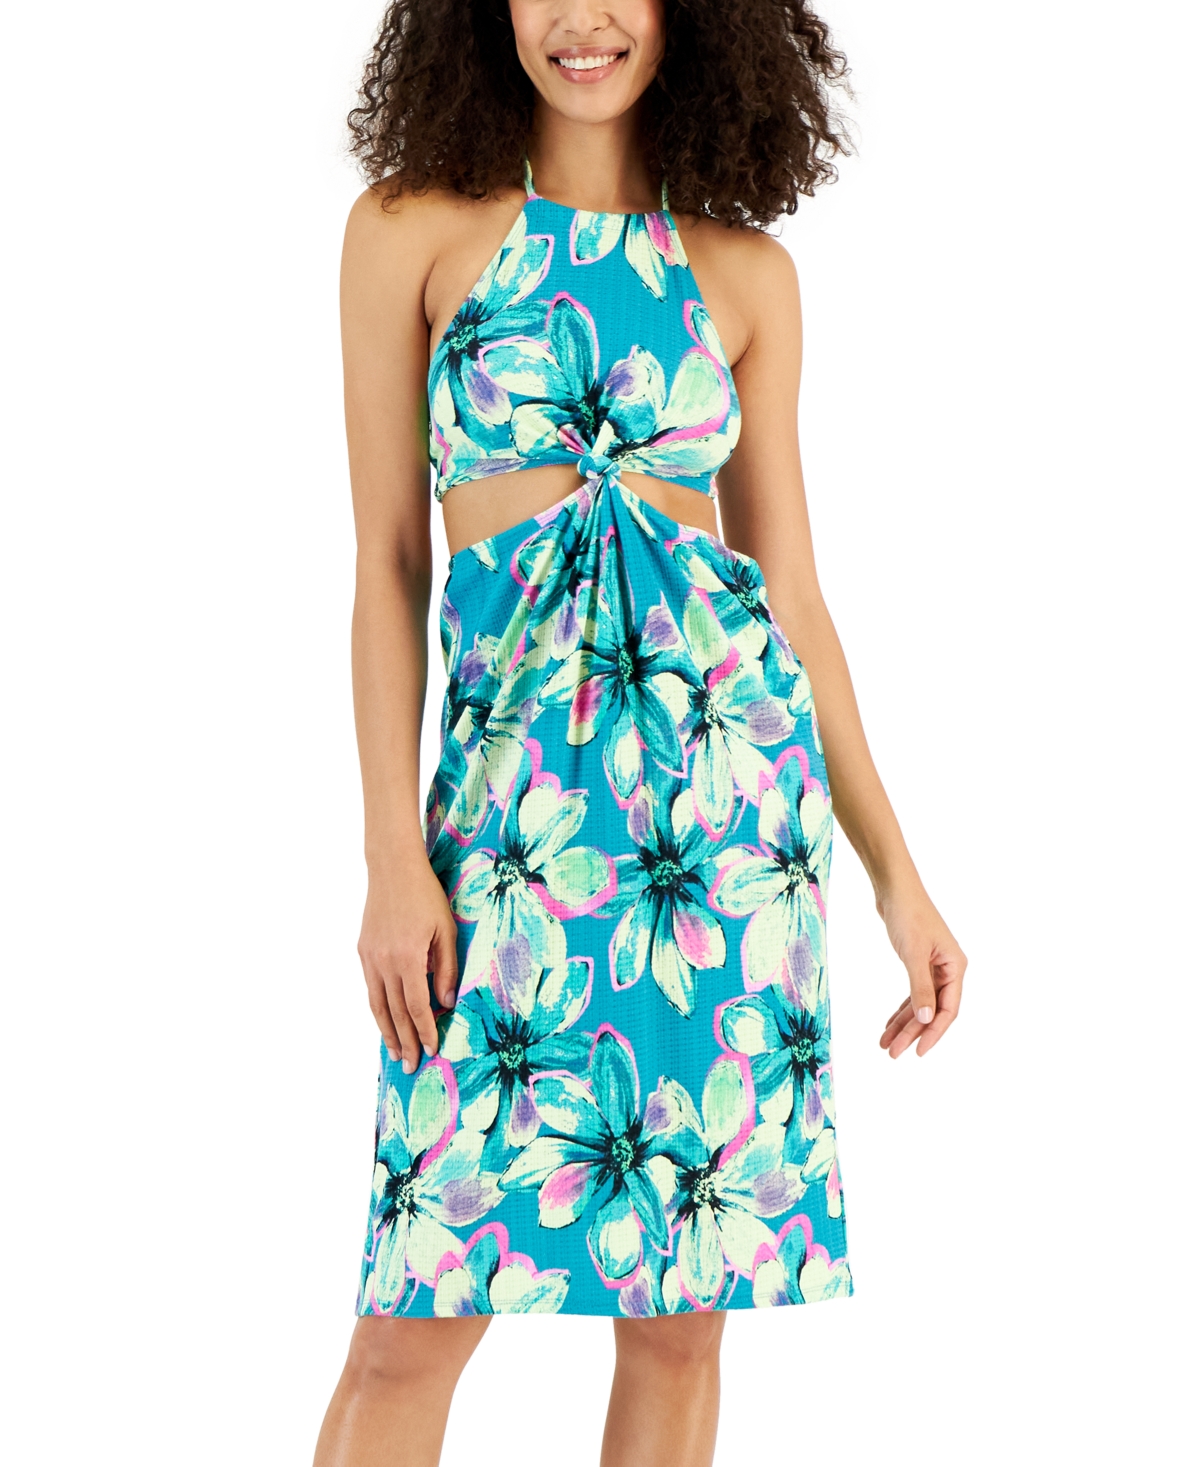 Women's Halter Twist-Front Dress Cover-Up, Created for Macy's - Atoll/lunar Glow